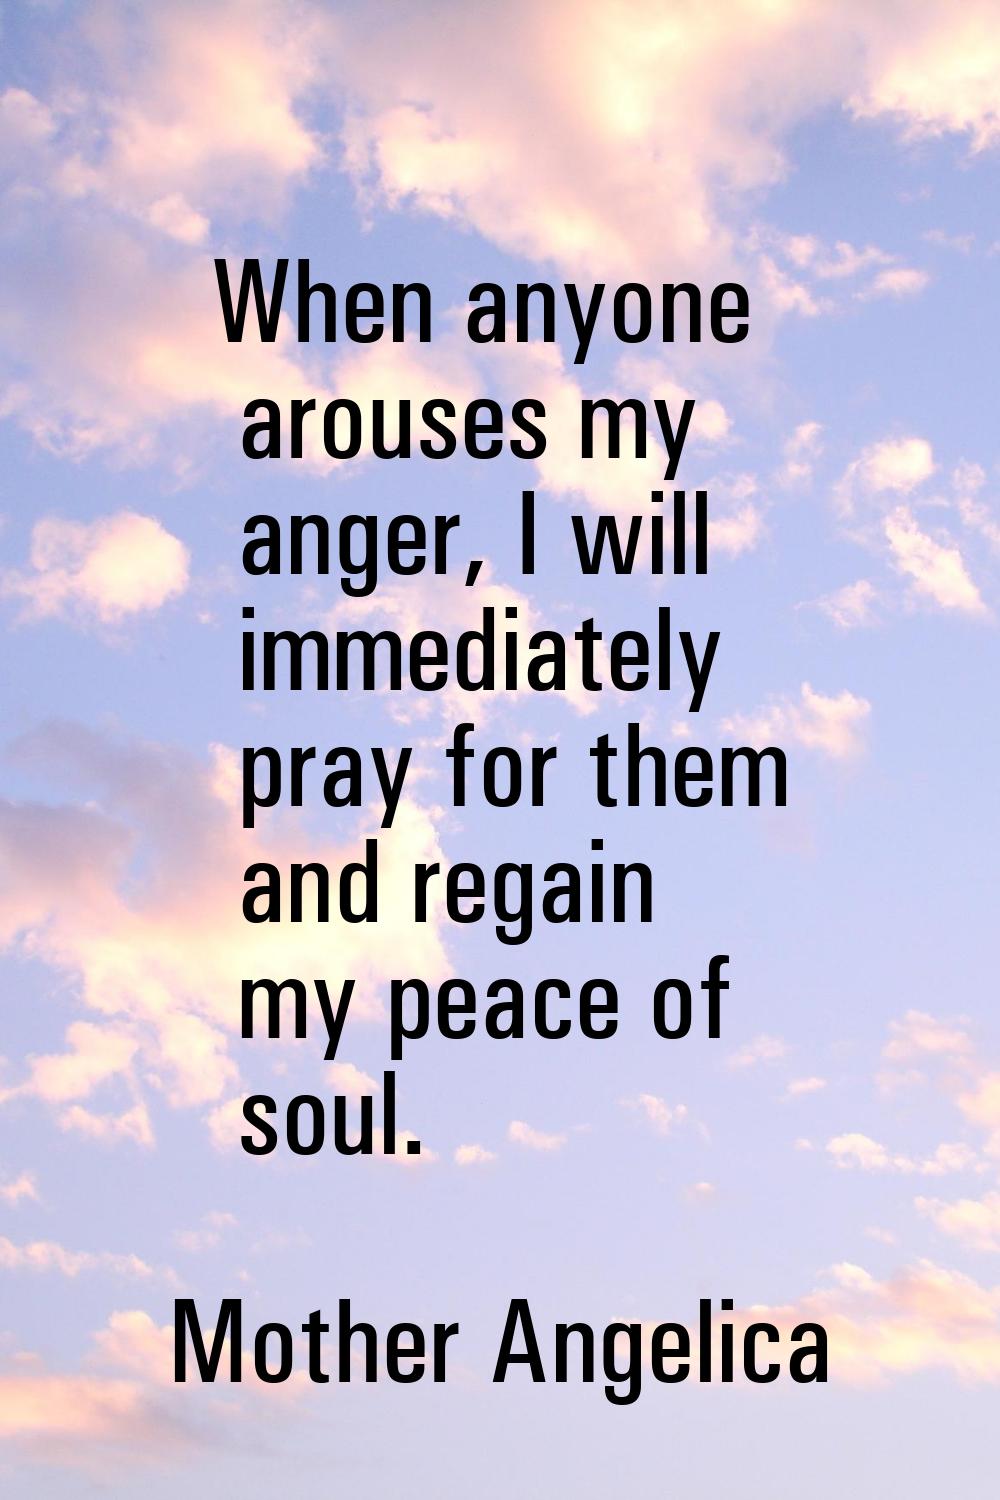 When anyone arouses my anger, I will immediately pray for them and regain my peace of soul.